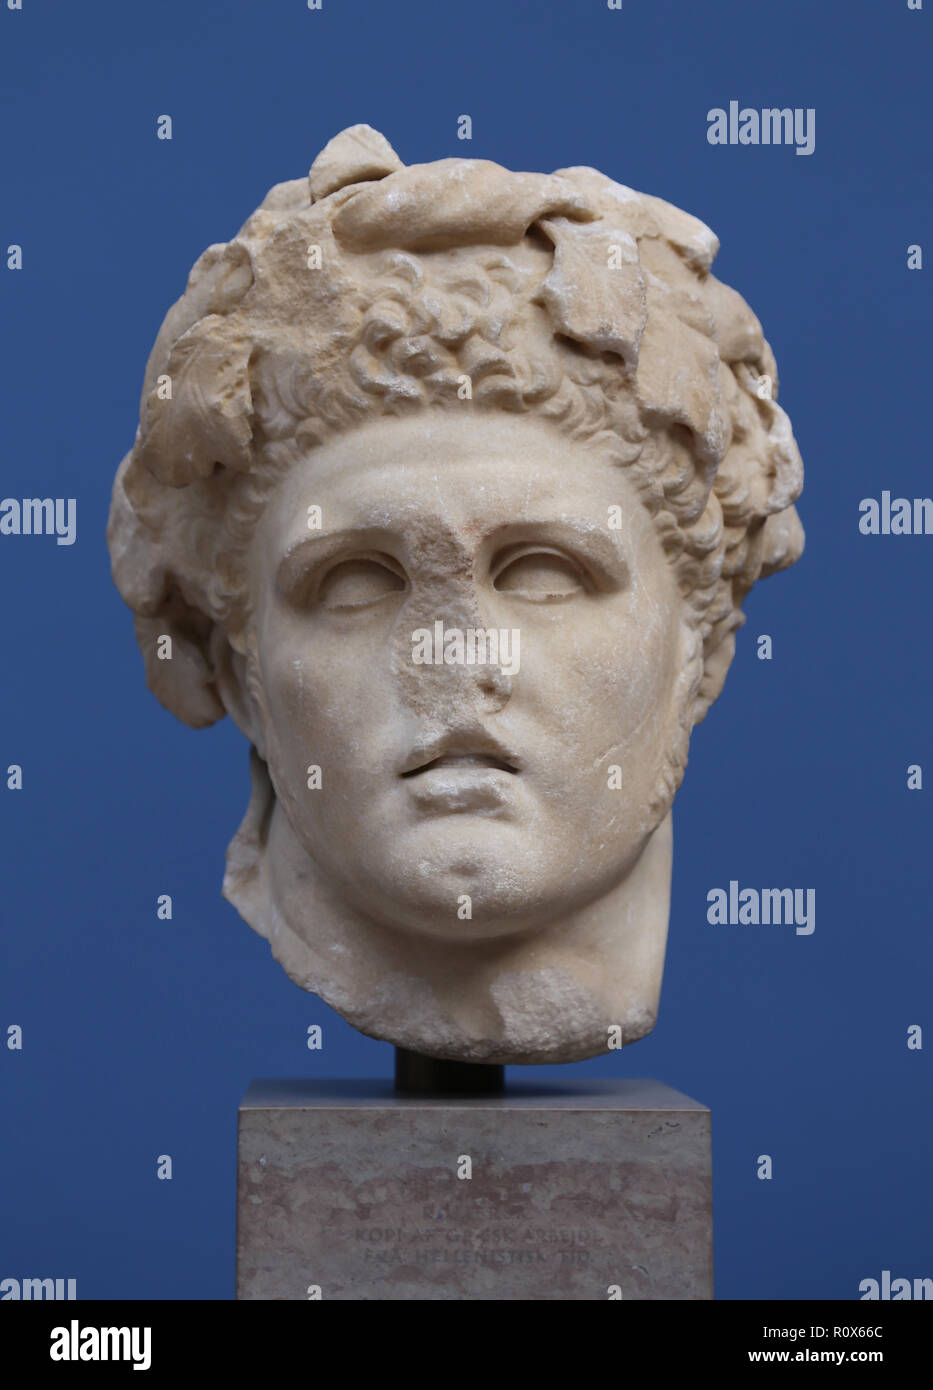 Head of Herakles, hero of Greek mythology. 1st century AD. Sculpted in marble. Stock Photo